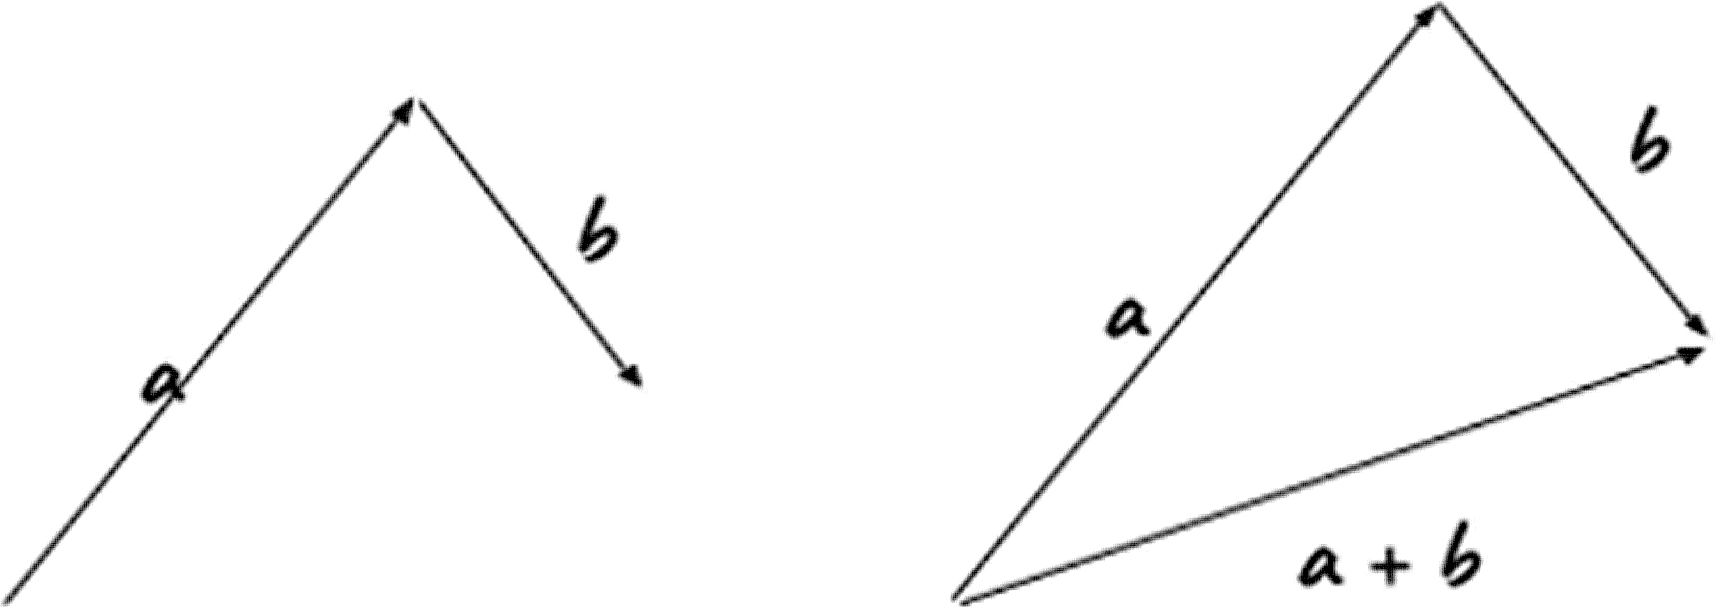 Vectors illustrating the final position of movement impacted by one and two variables.